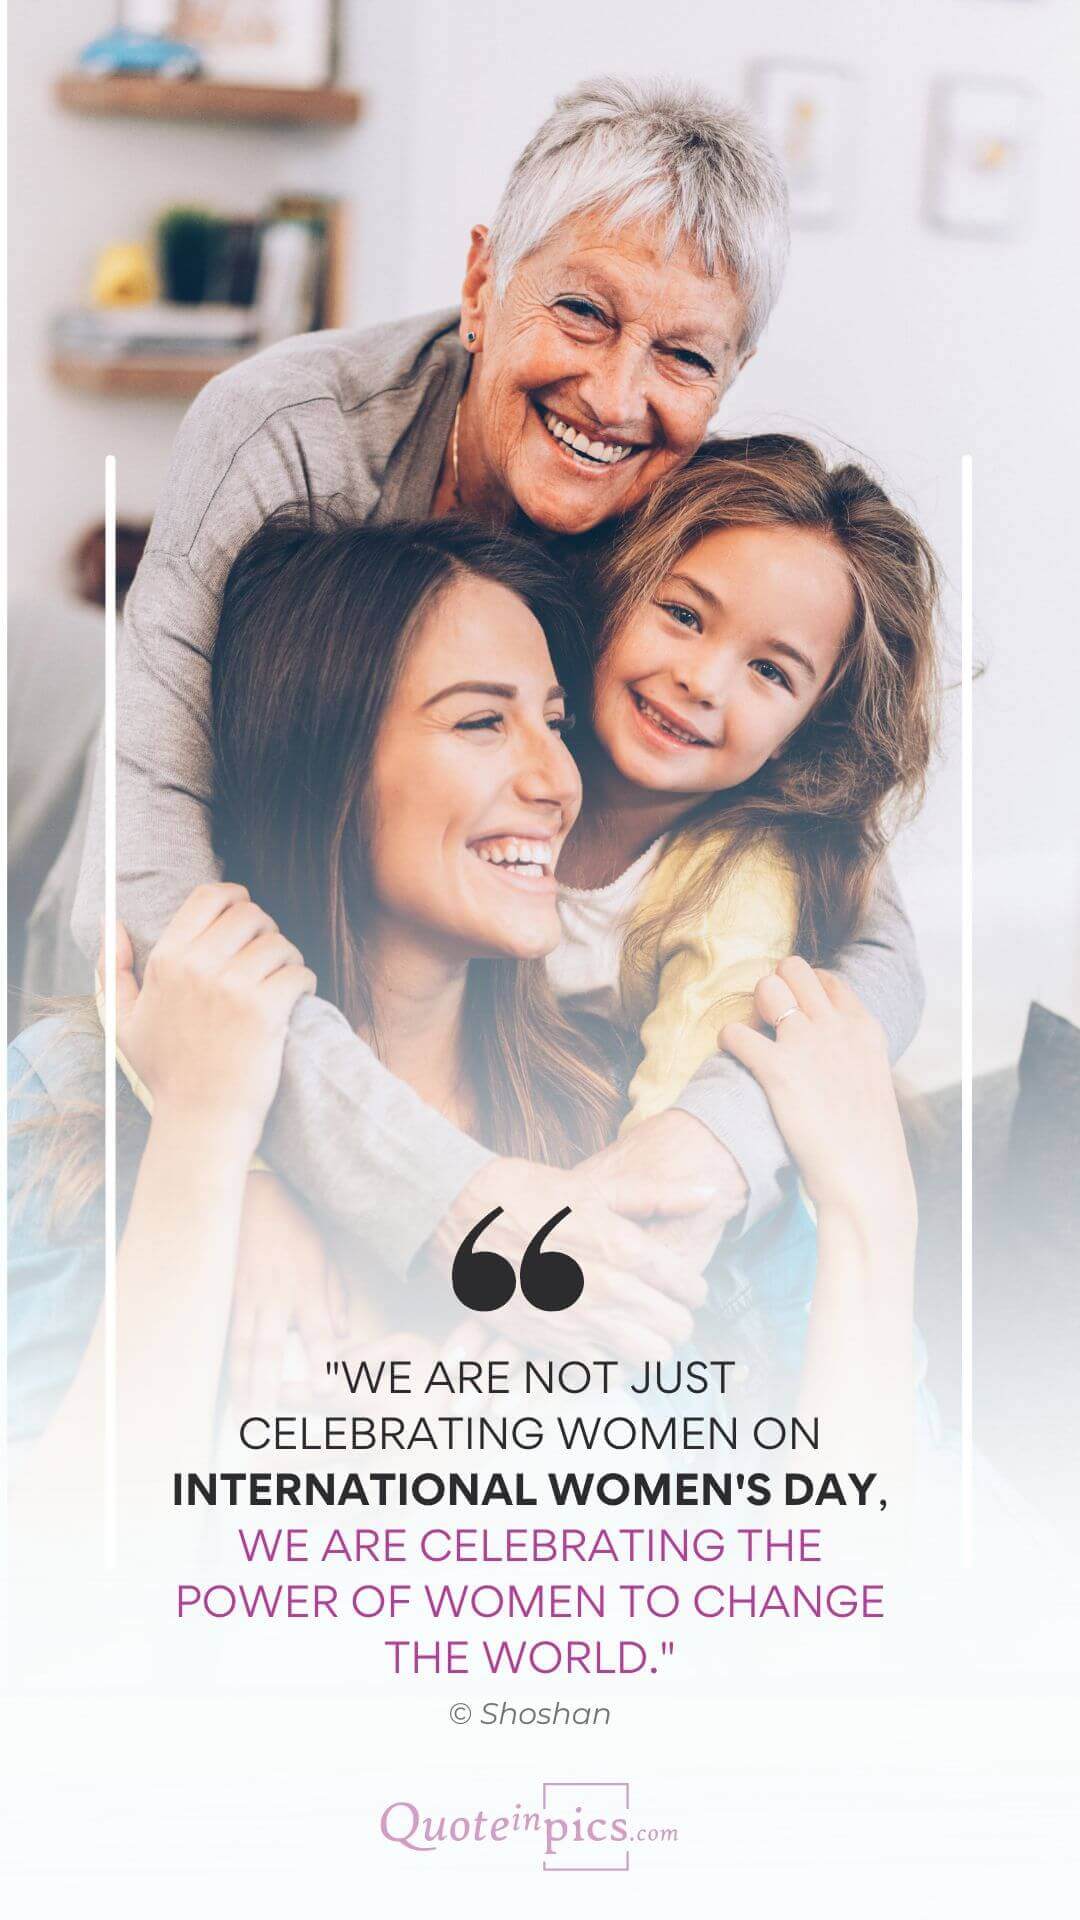 We are not just celebrating women on International Women's Day